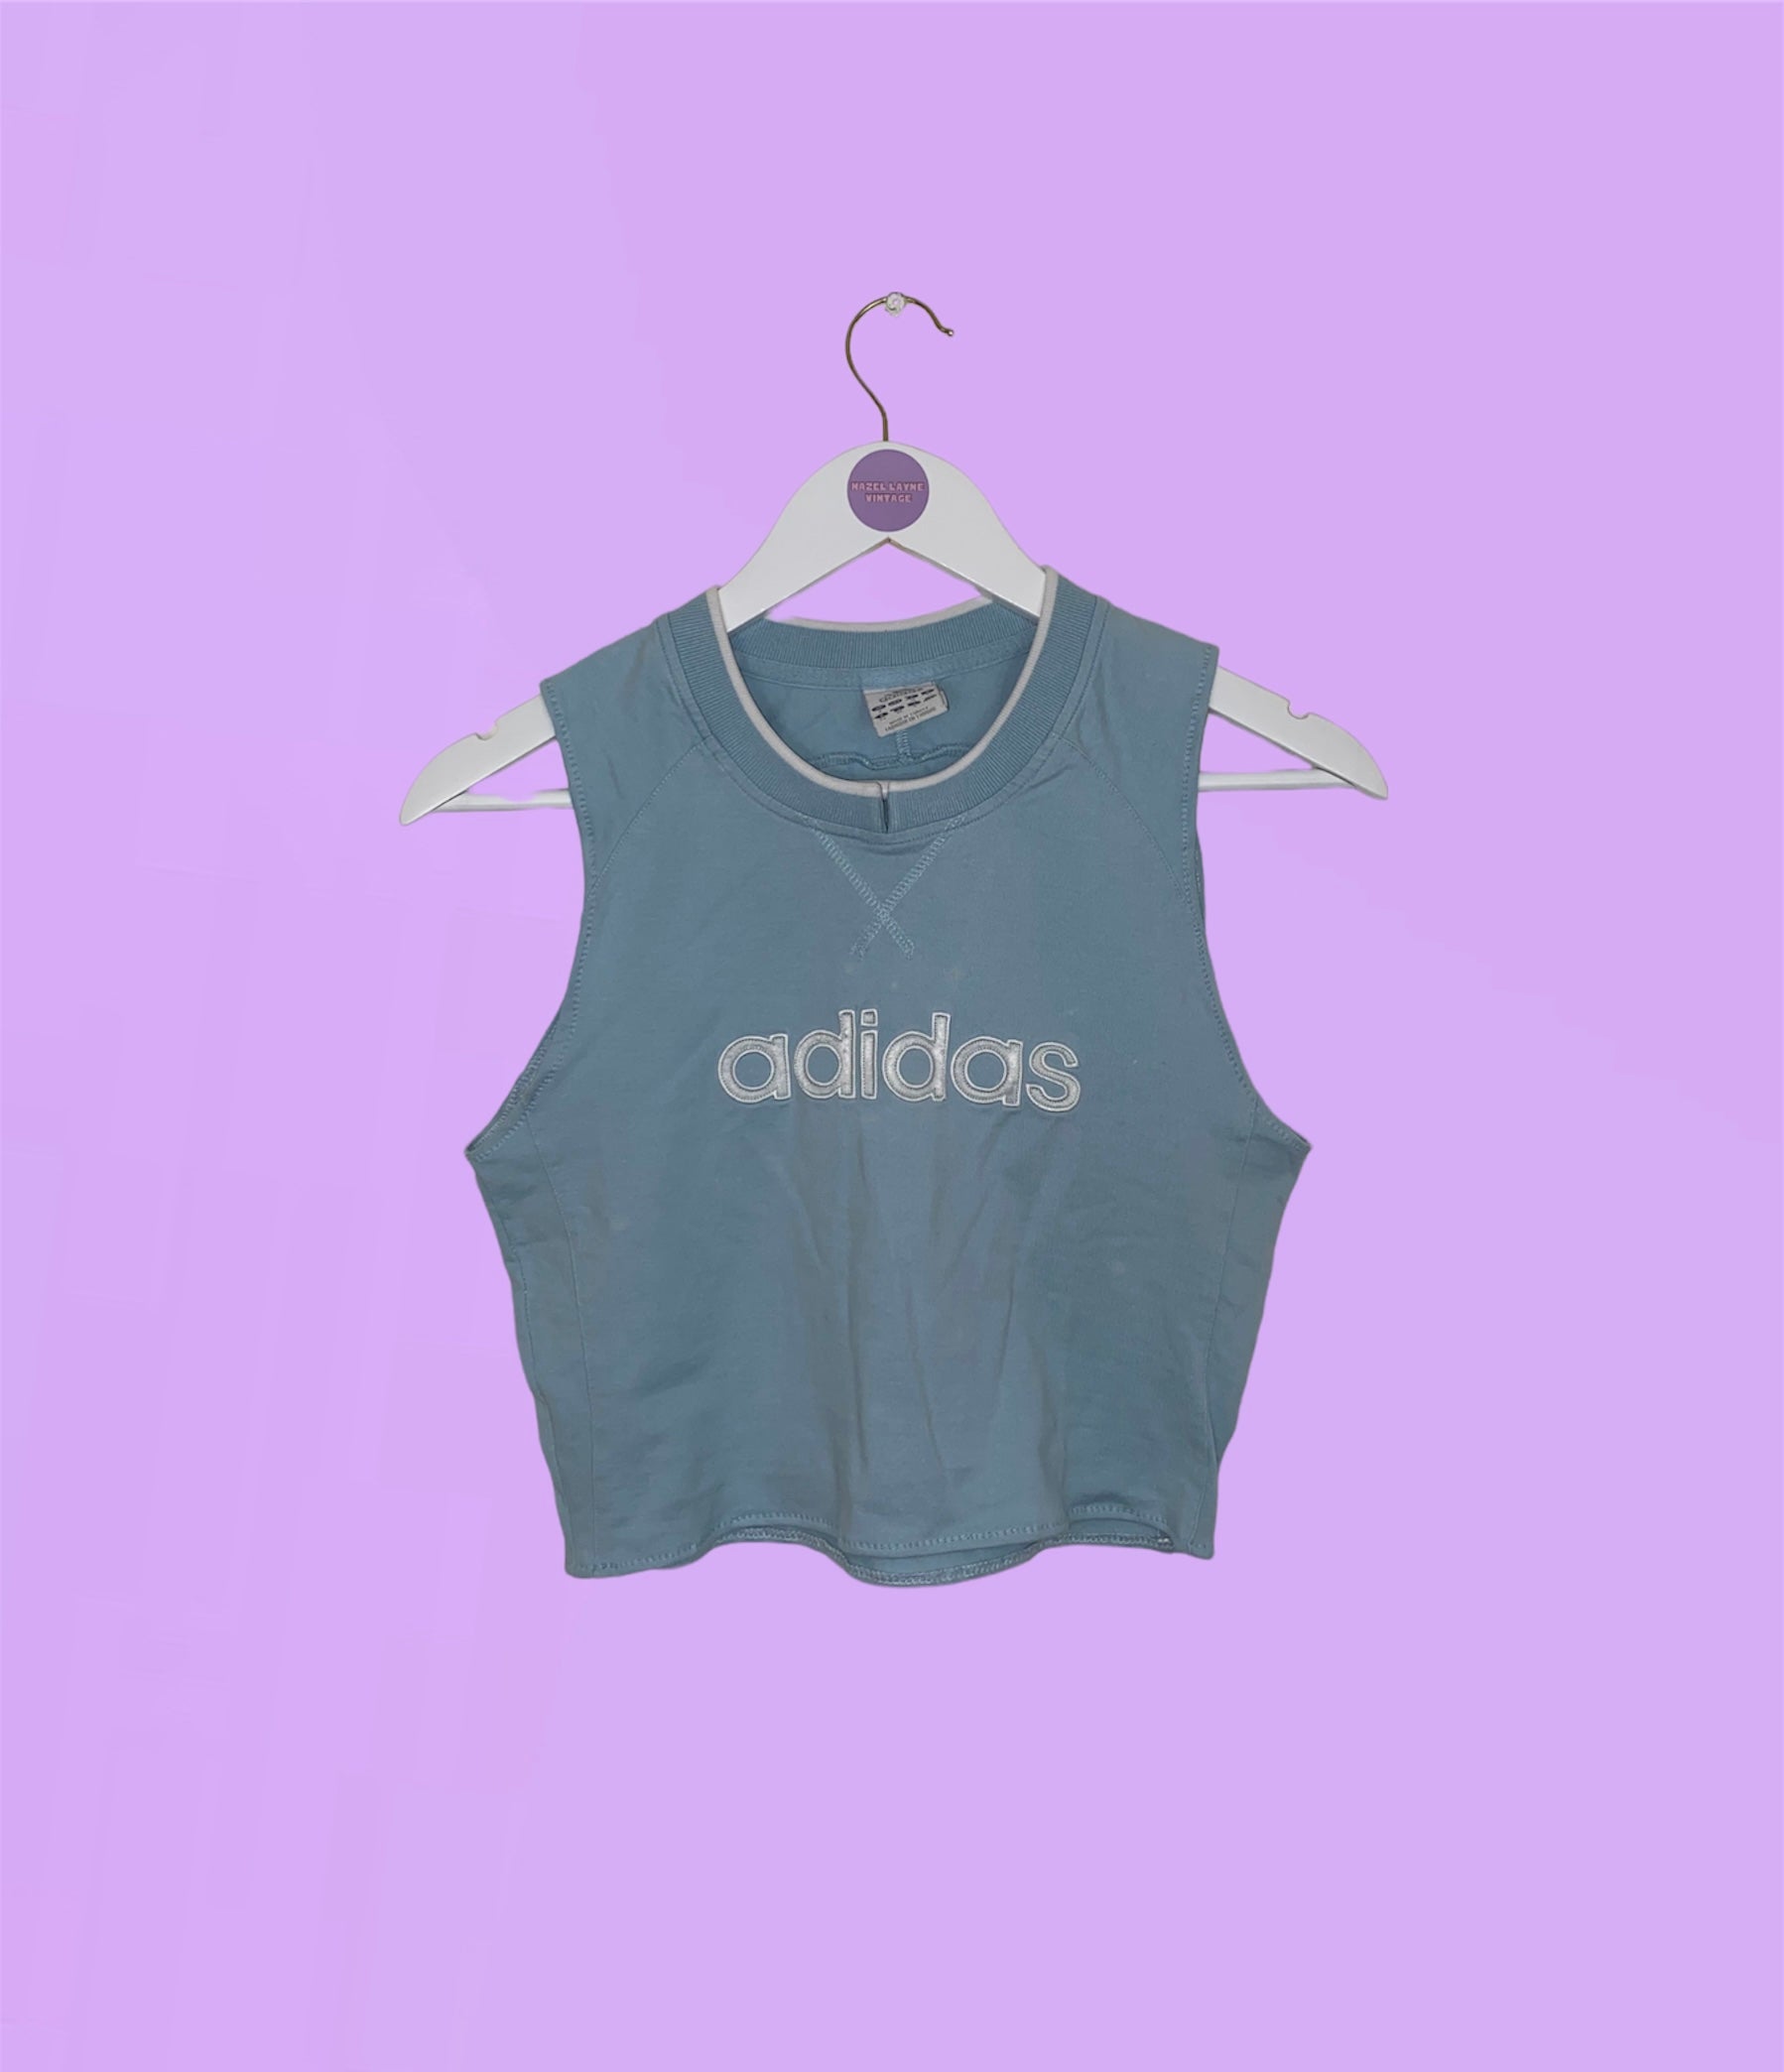 light blue sleeveless crop top with white adidas logo shown on a lilac background